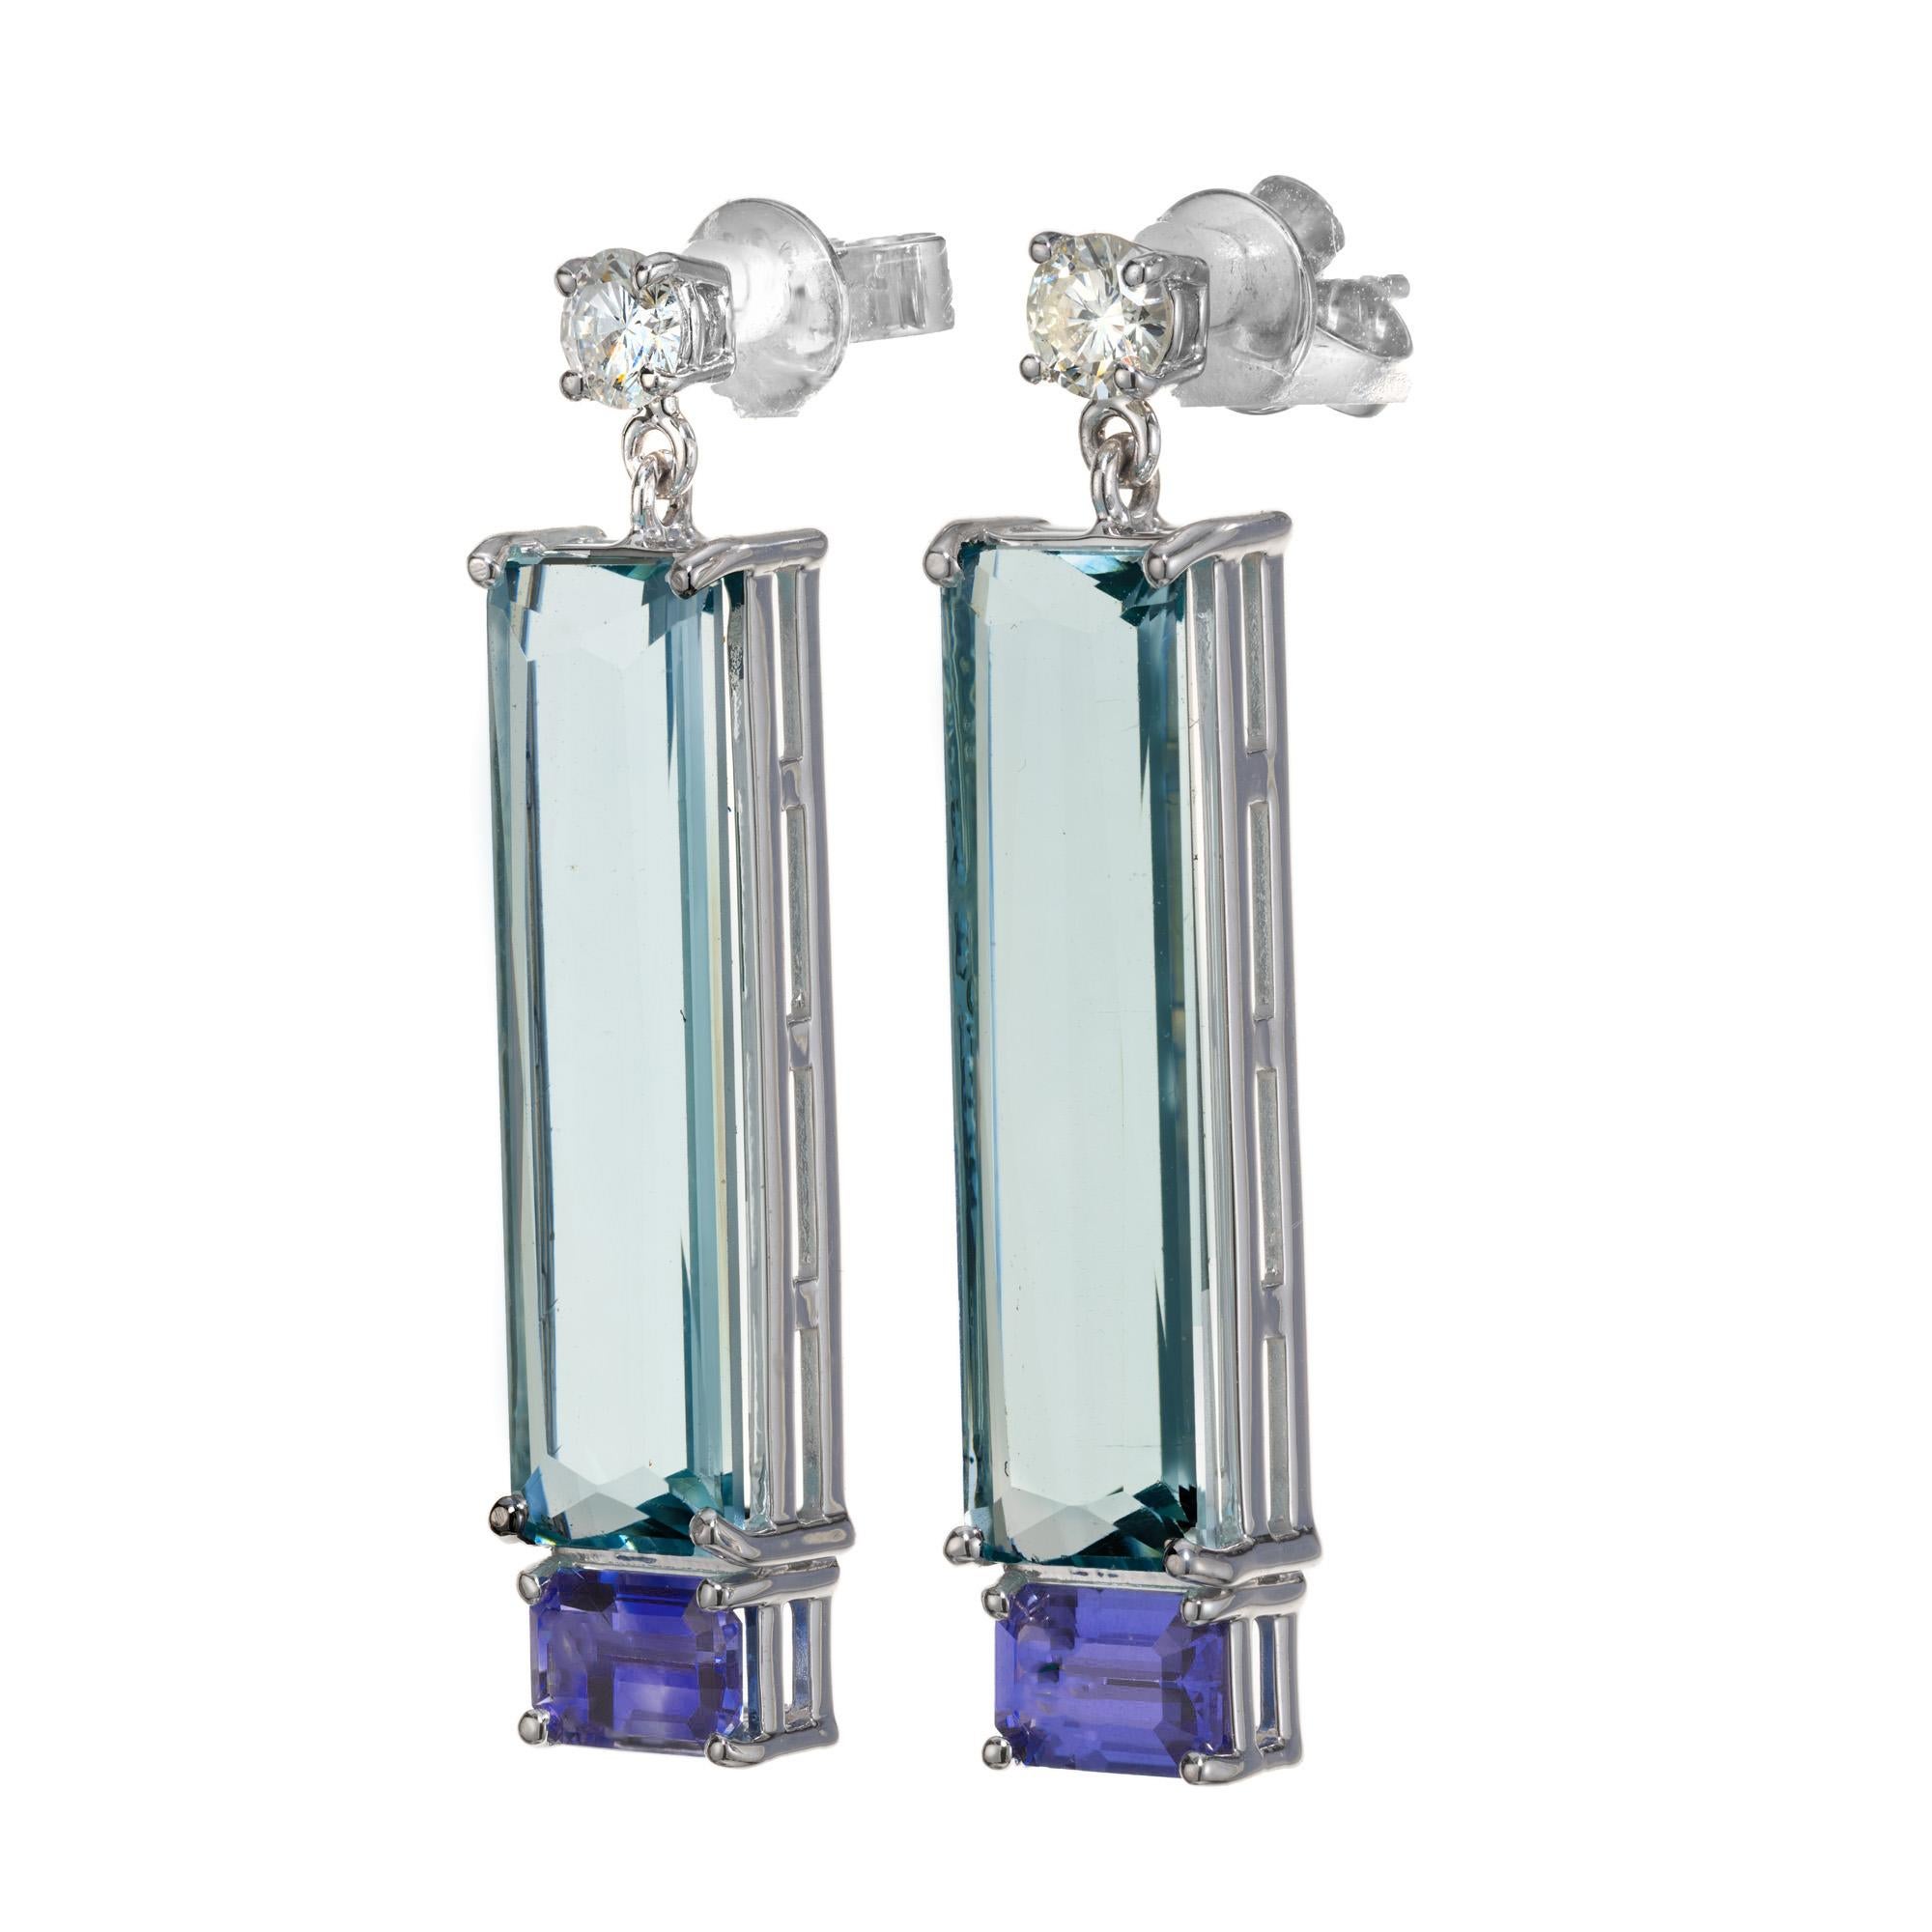 Aquamarine, sapphire and diamond dangle earrings. Two unusual elongated emerald cut natural aquas totaling 9.73cts. matched with blue and purple emerald cut accent sapphires, set in 14k white gold settings. One round brilliant cut diamond tops off